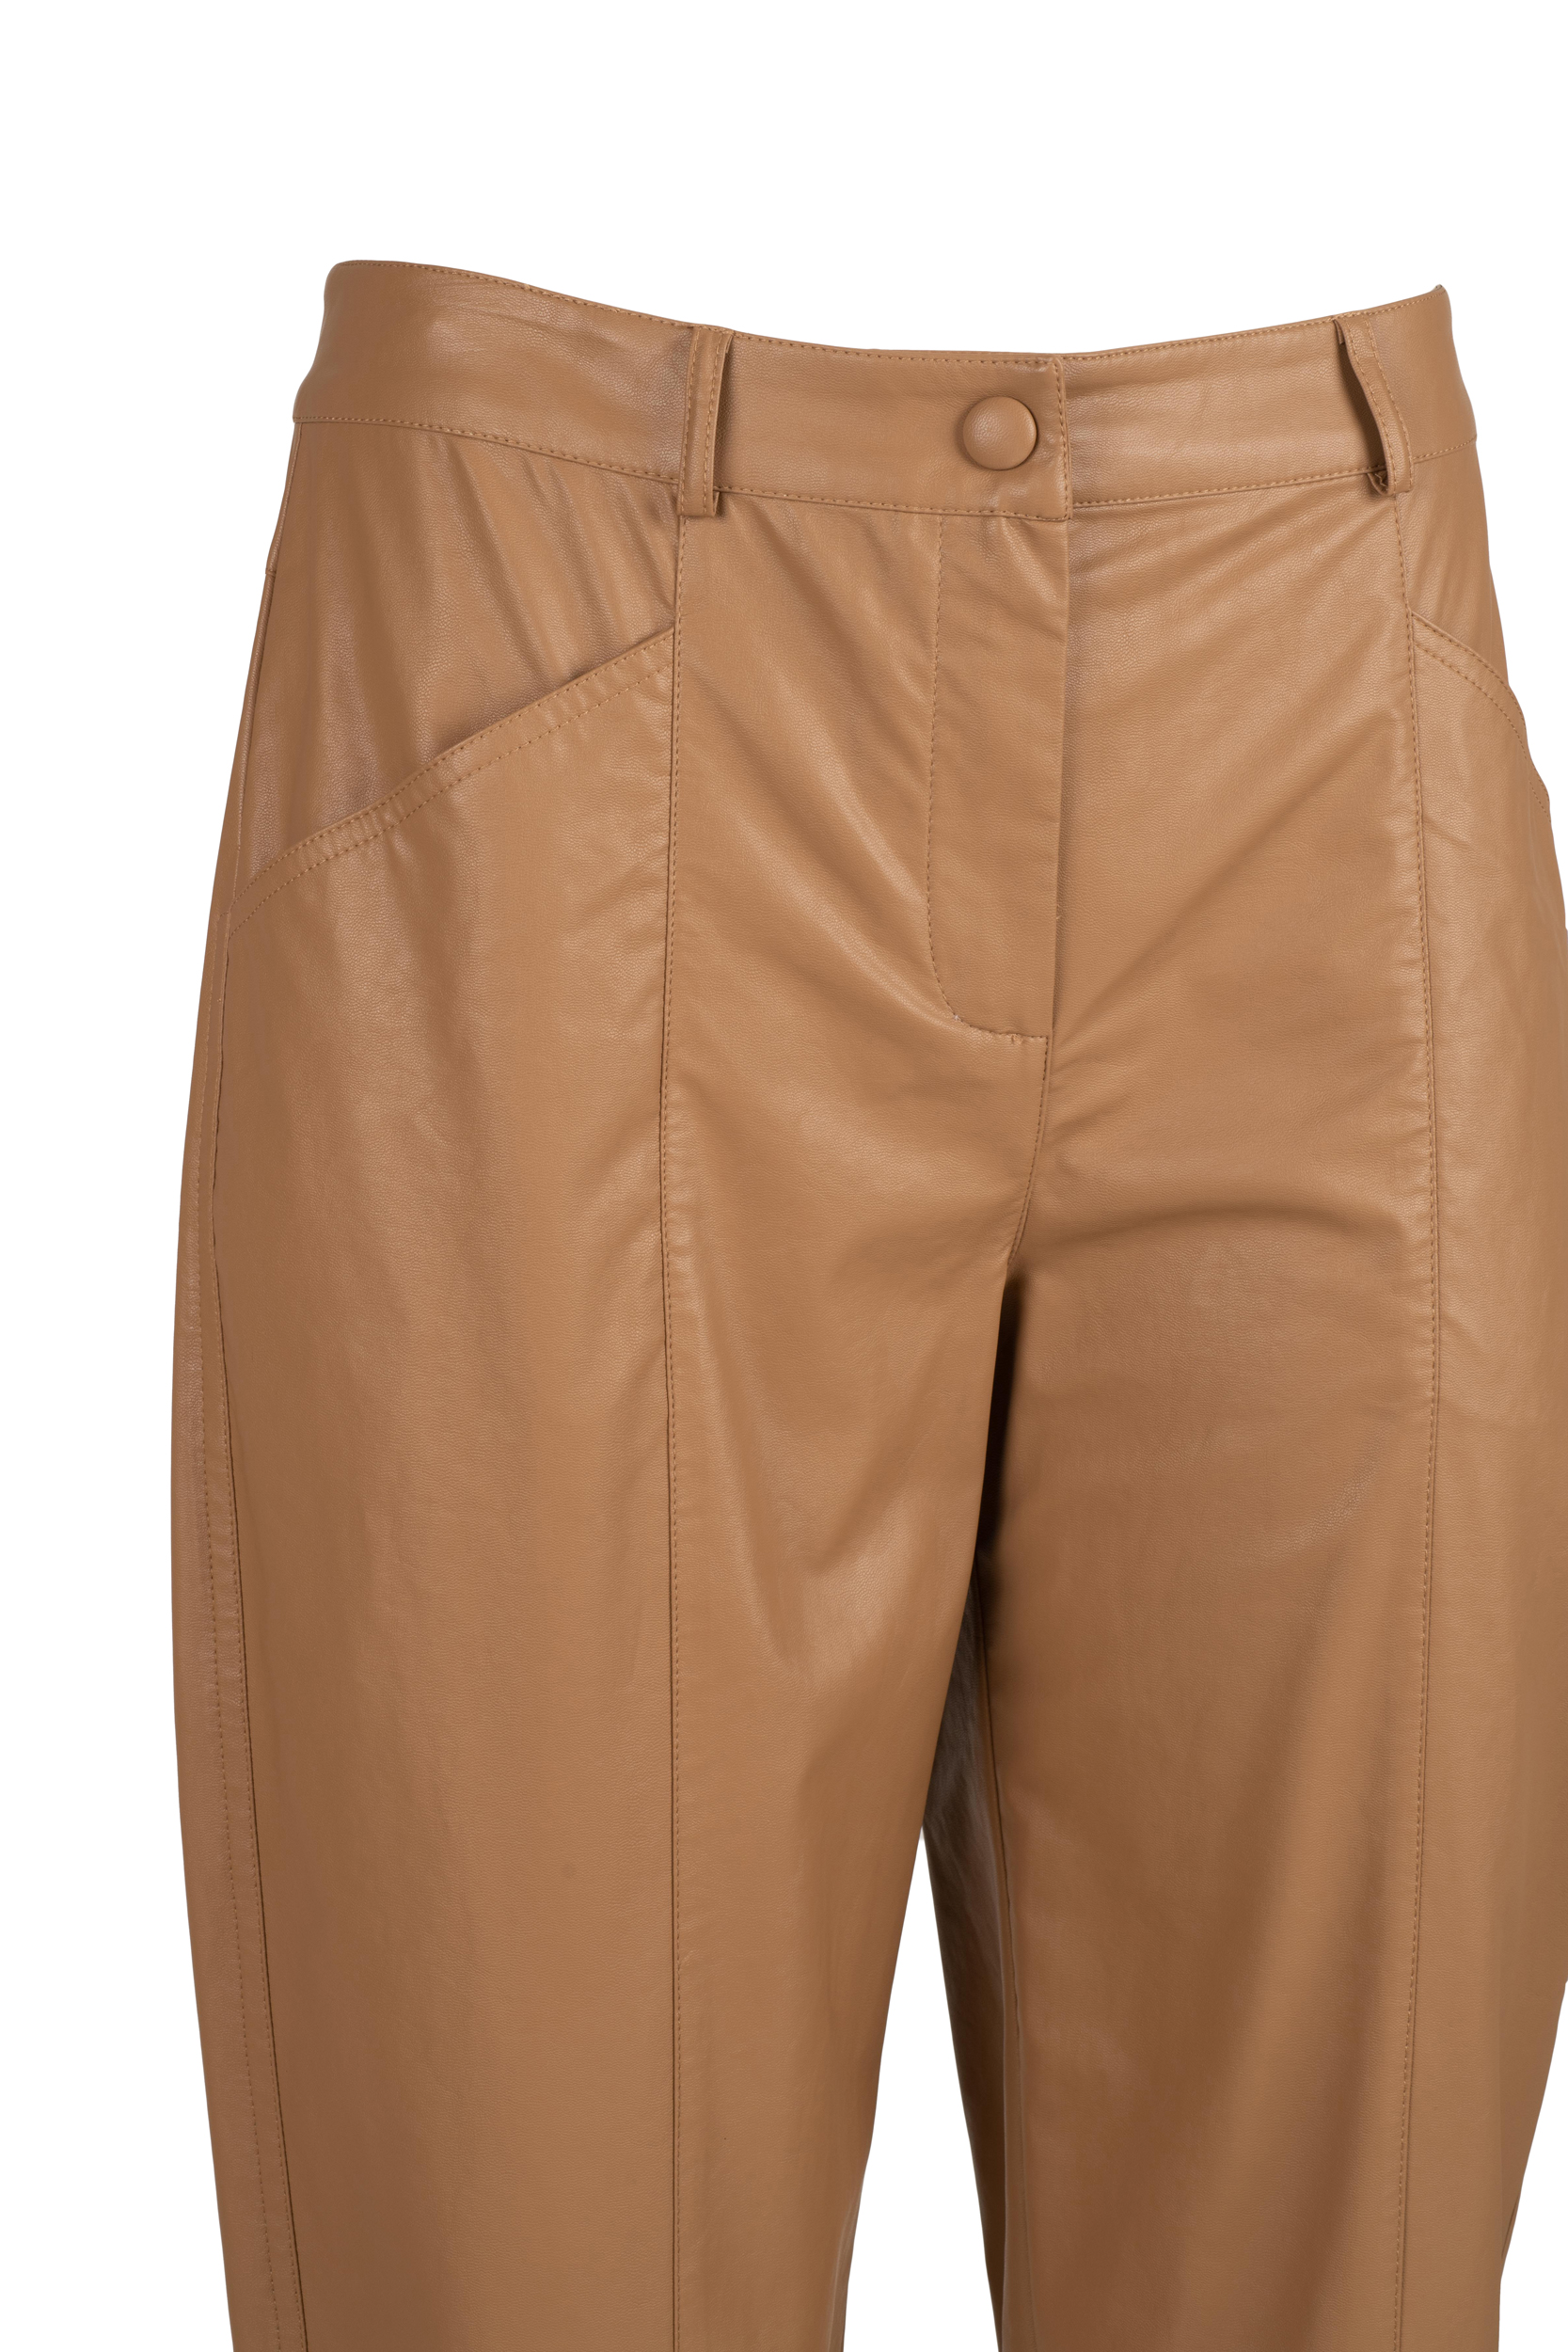 Faux Leather Carrot Trousers with Front Seam and Pockets